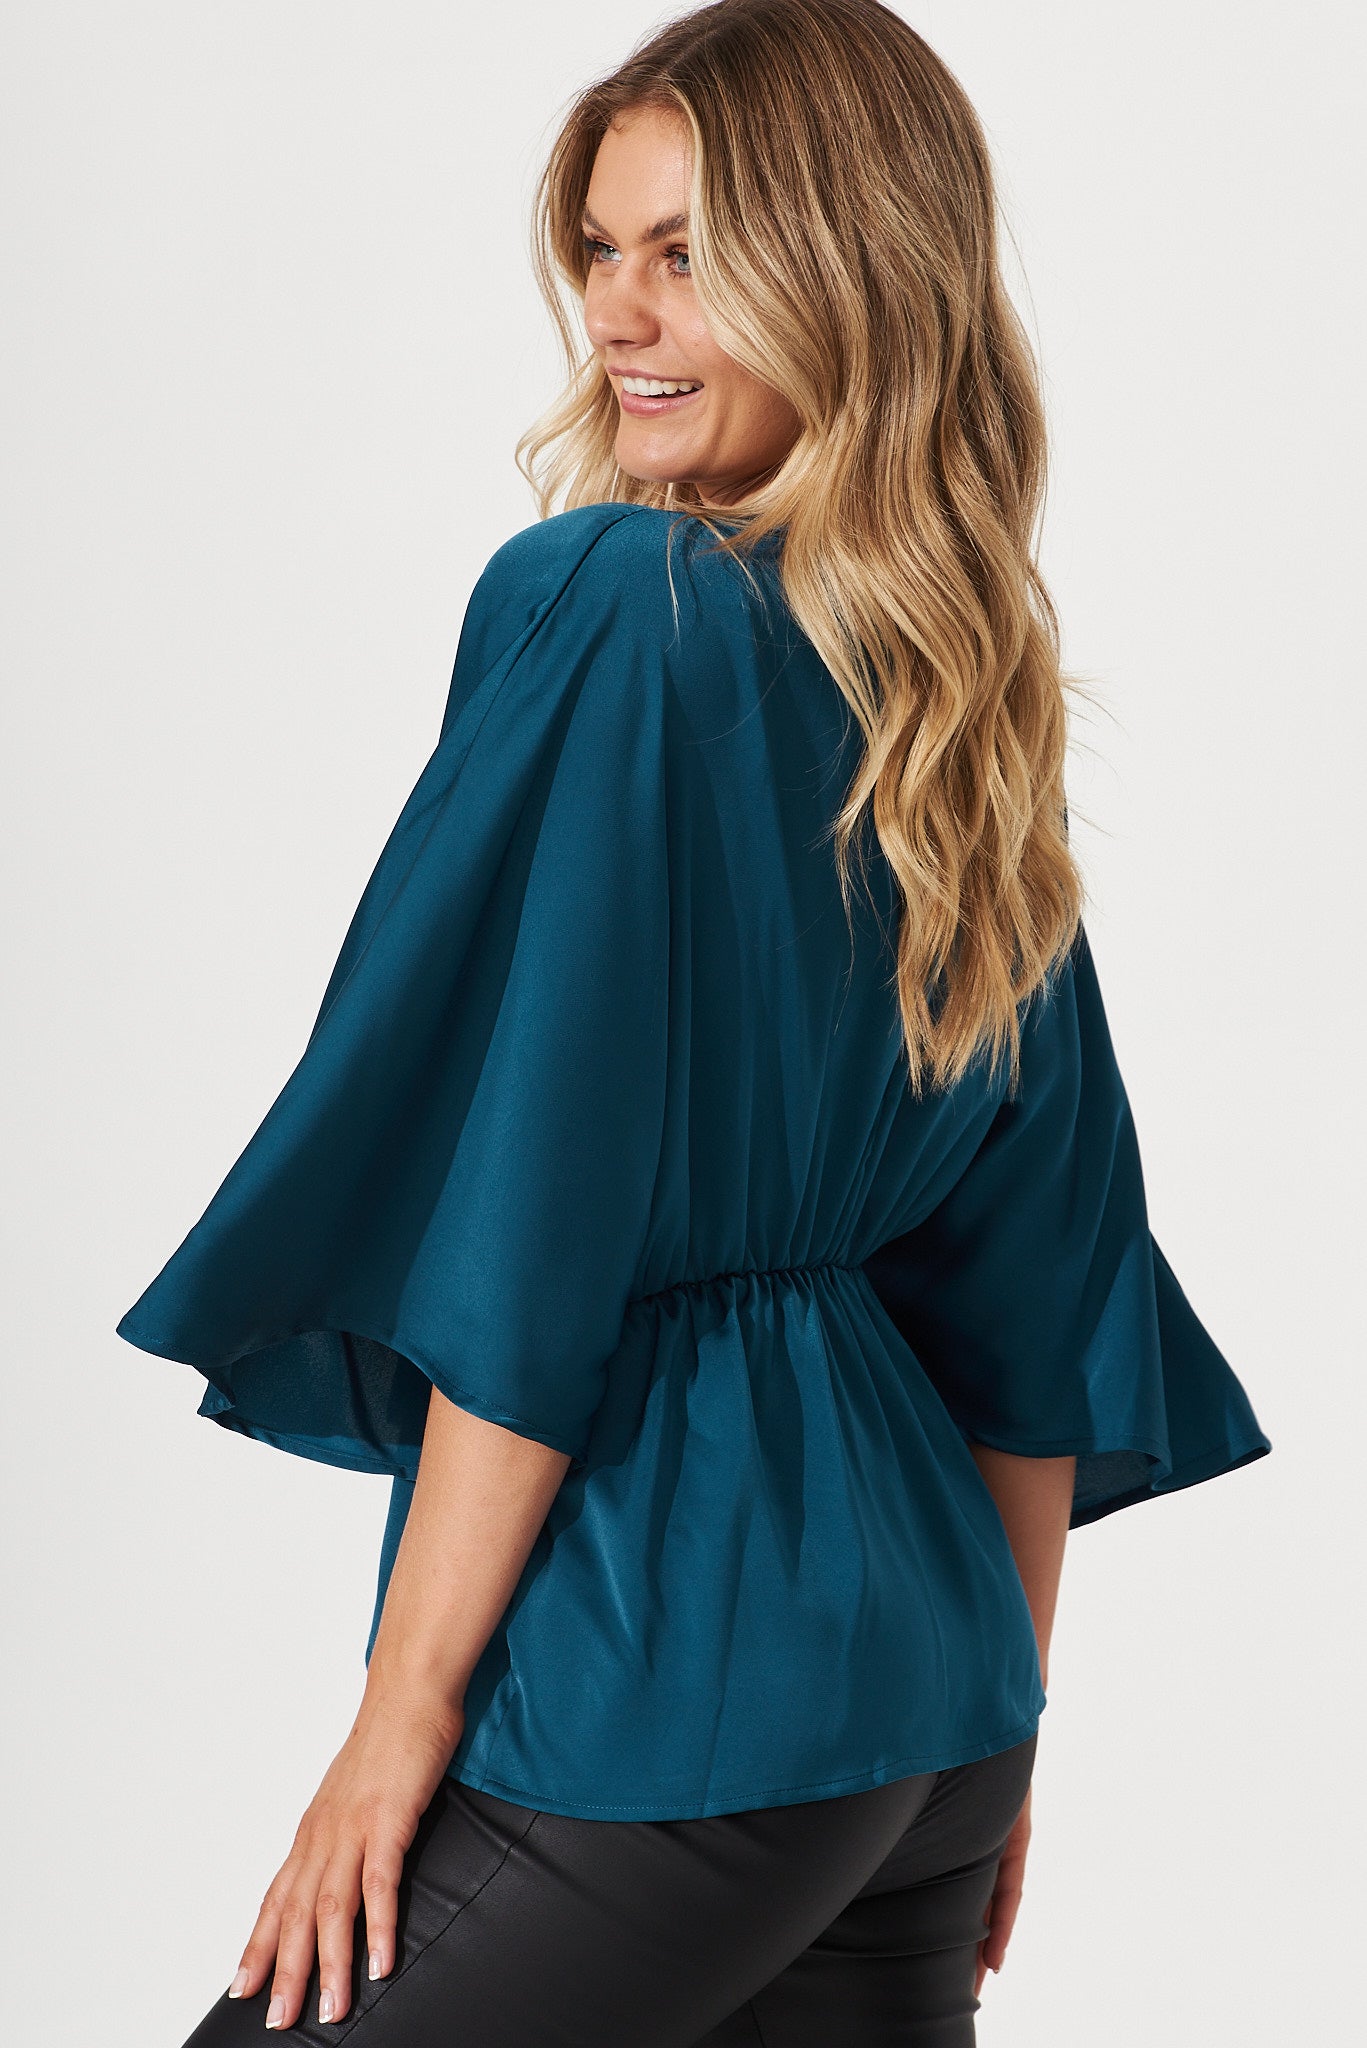 Leia Top In Teal Satin – St Frock